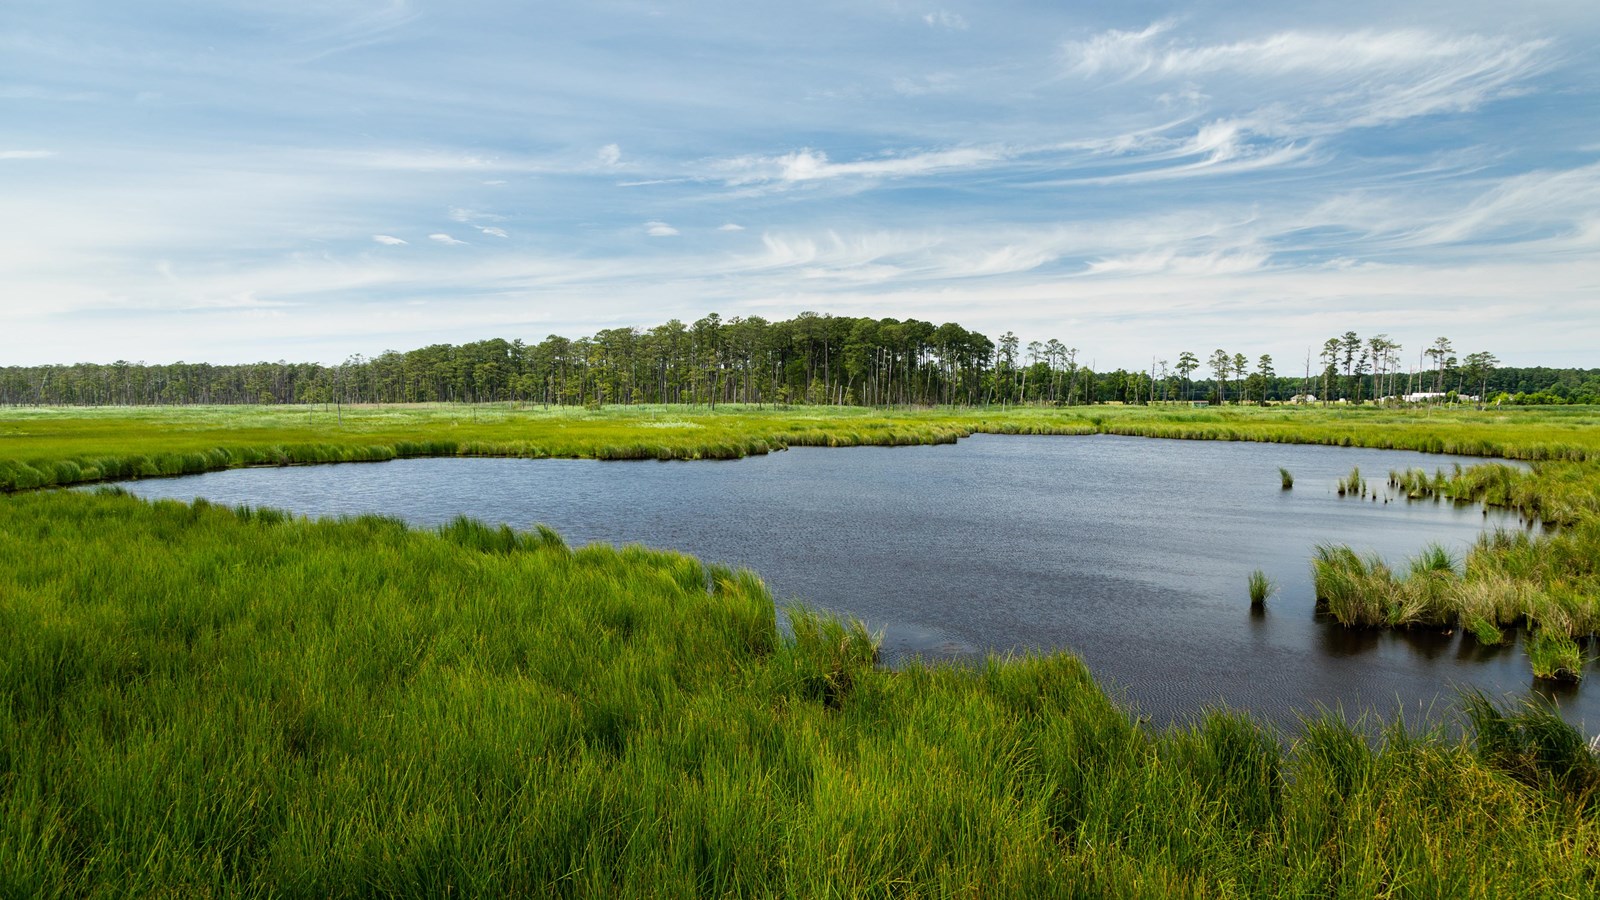 Green marsh grasses in the foreground, water in the middle-ground, and a pine forest on the horizon.